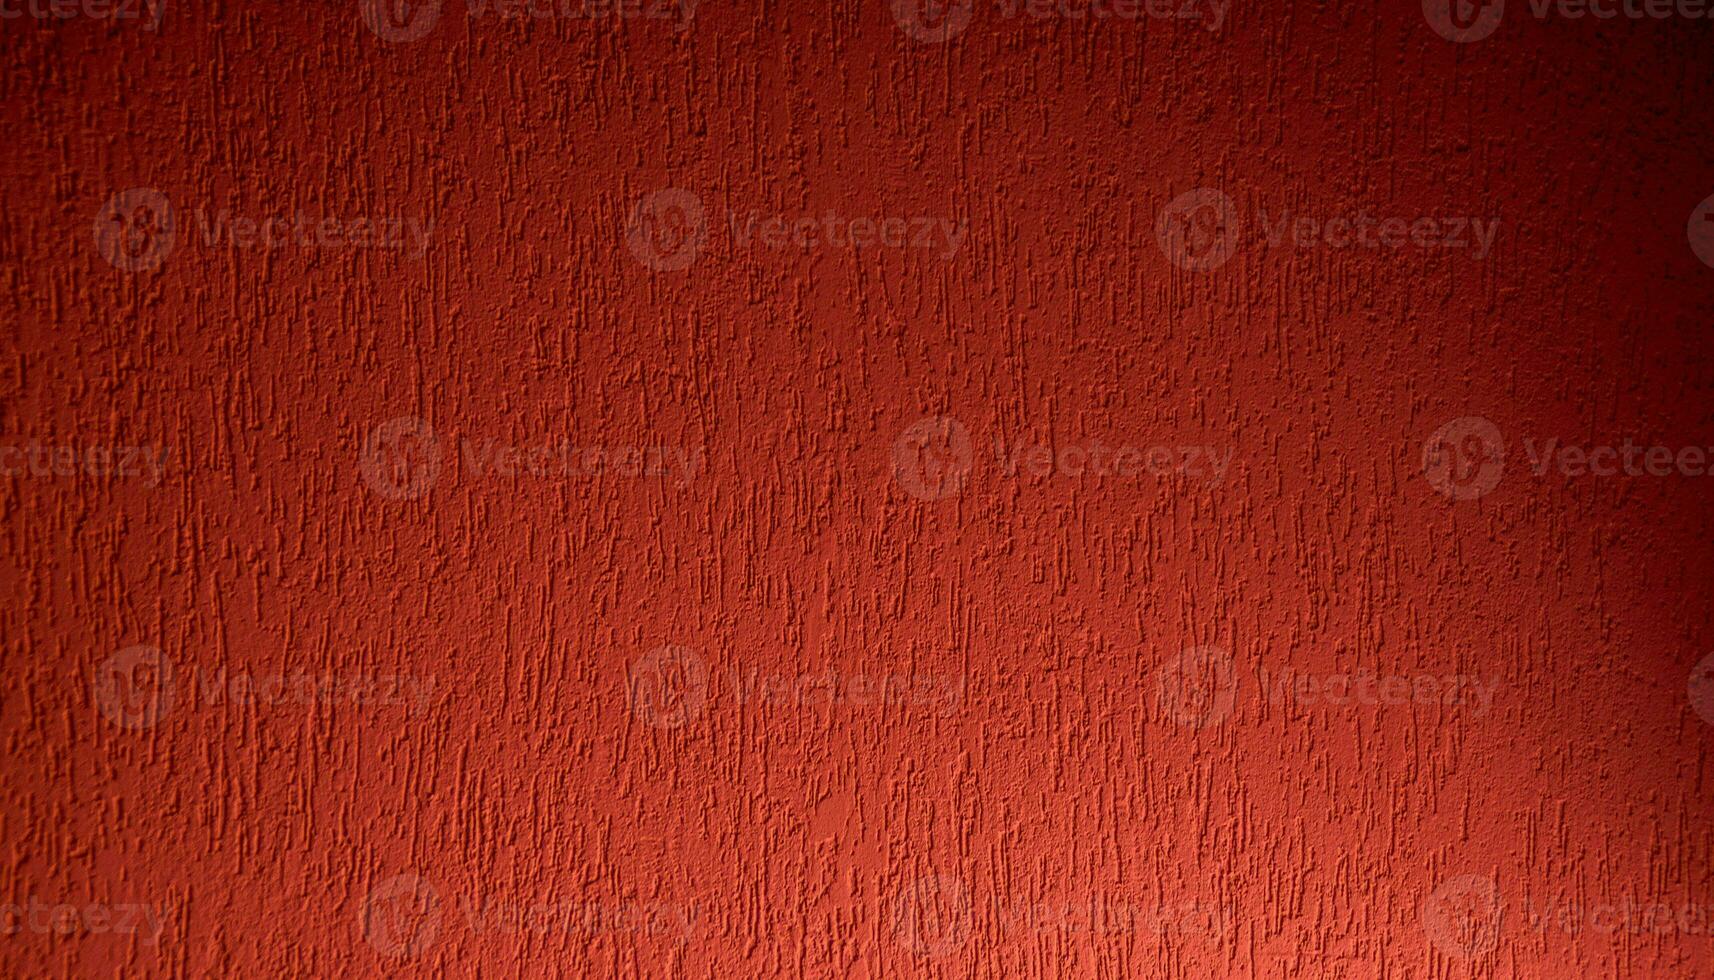 Brick Cement Wall Background With Deep Red Paint TextureBrick Cement Wall Background With Deep Red Paint Texture photo